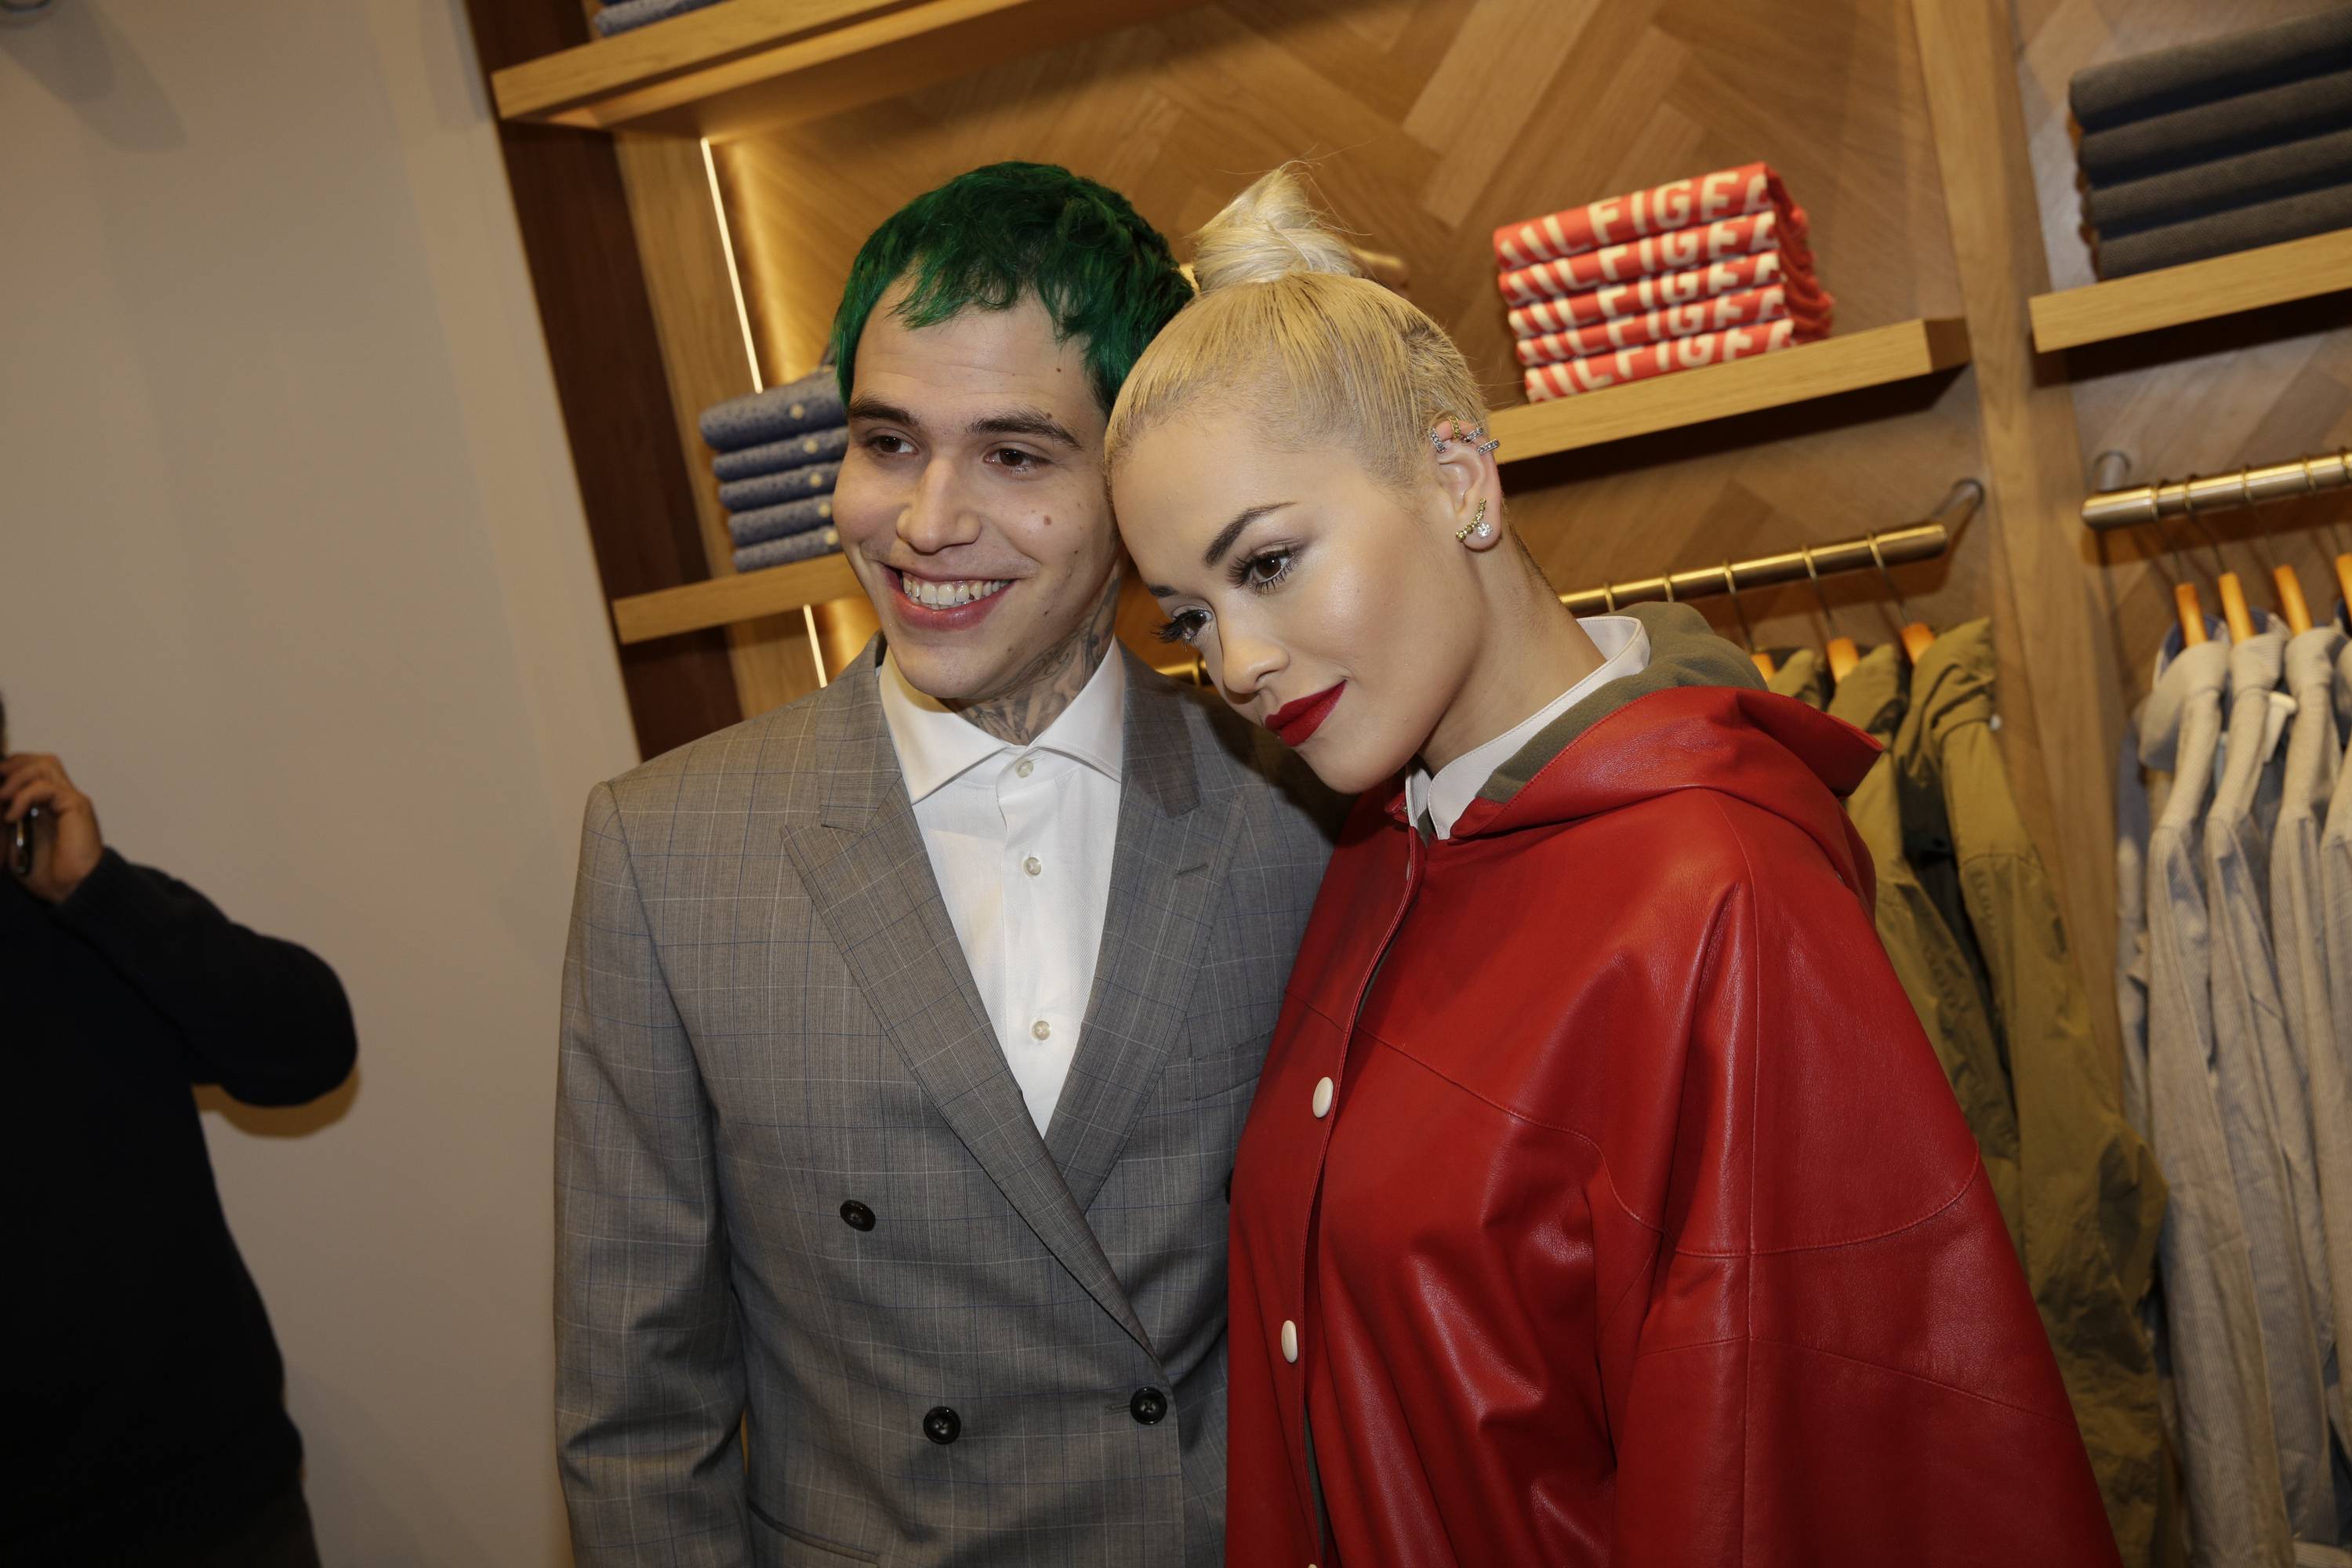 Rita Ora attends the Tommy Hilfiger Opening Store